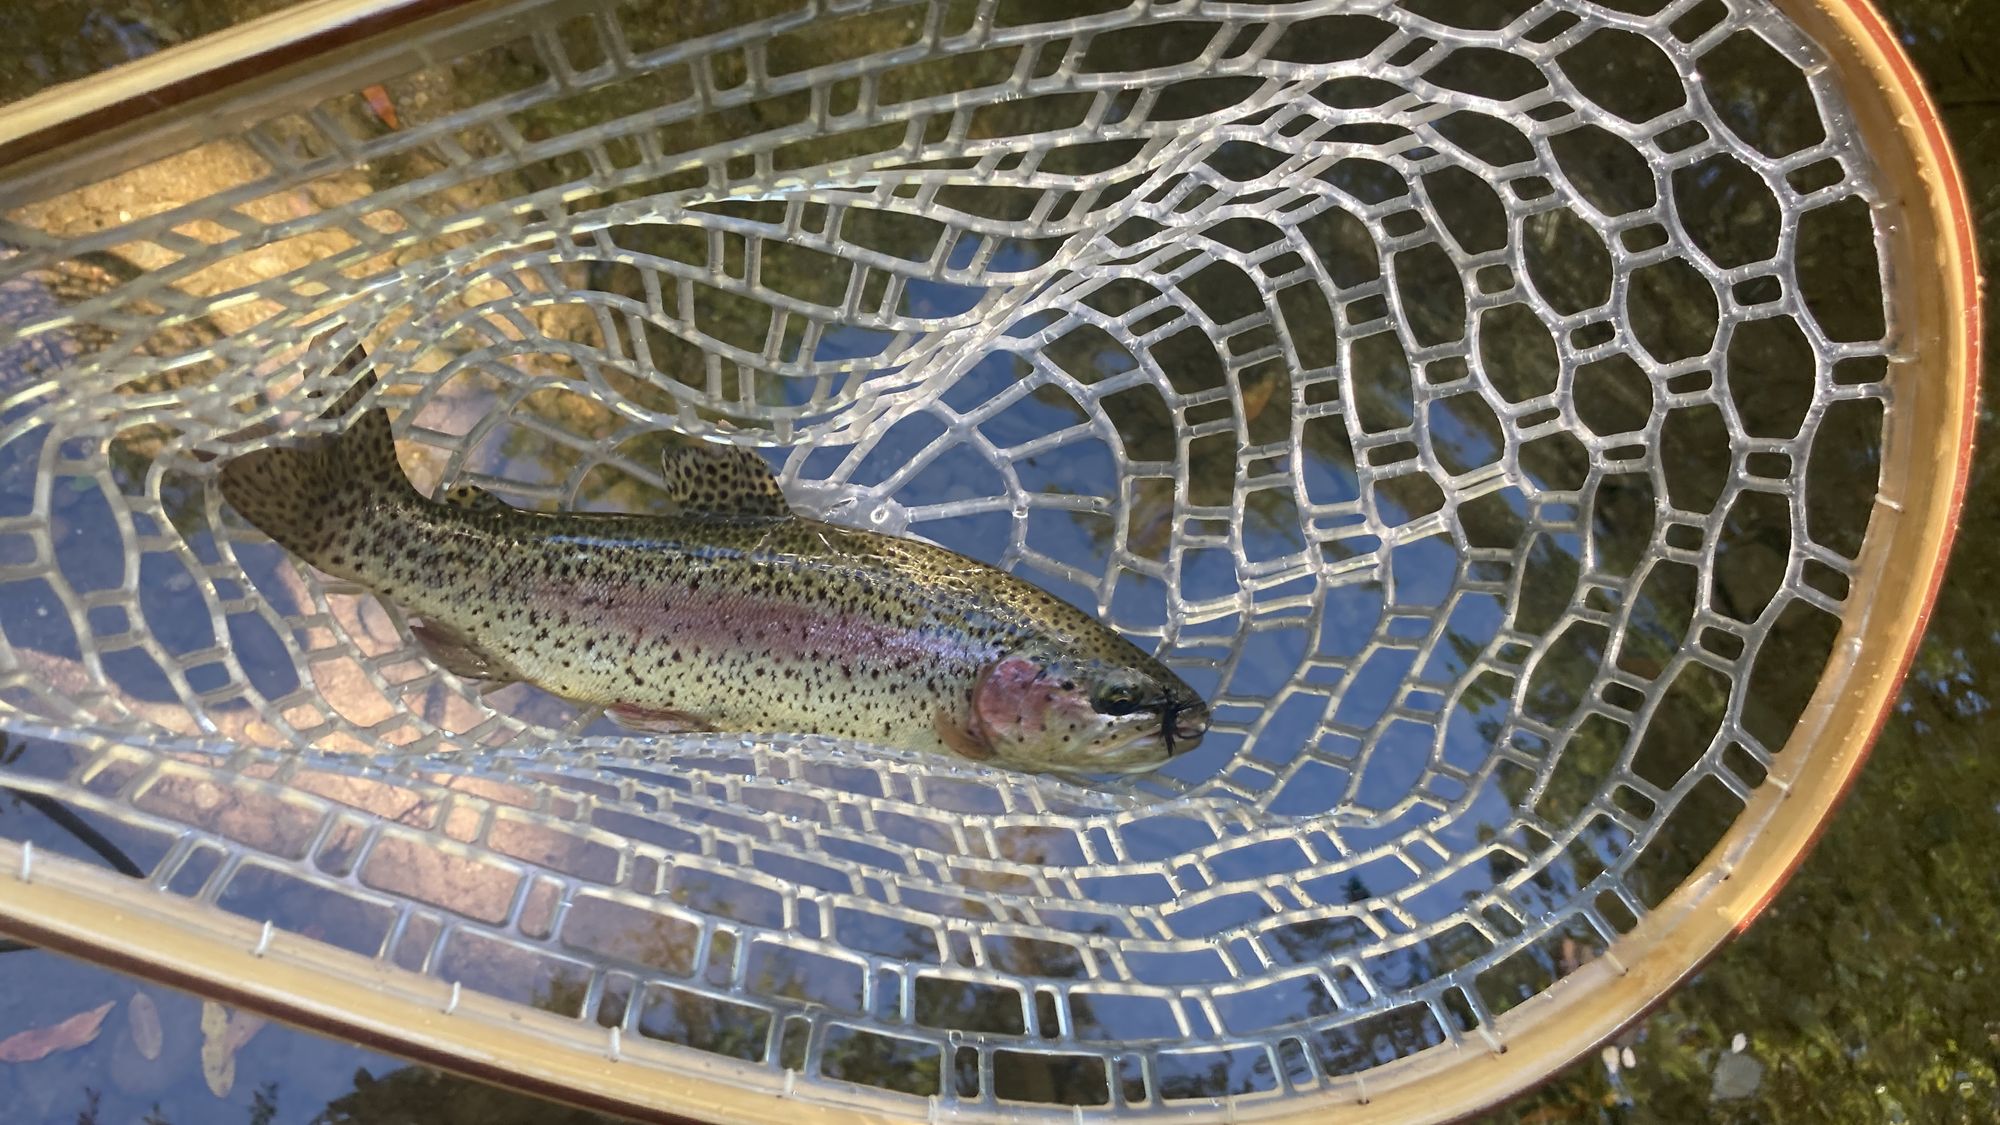 Darker colored rainbow trout